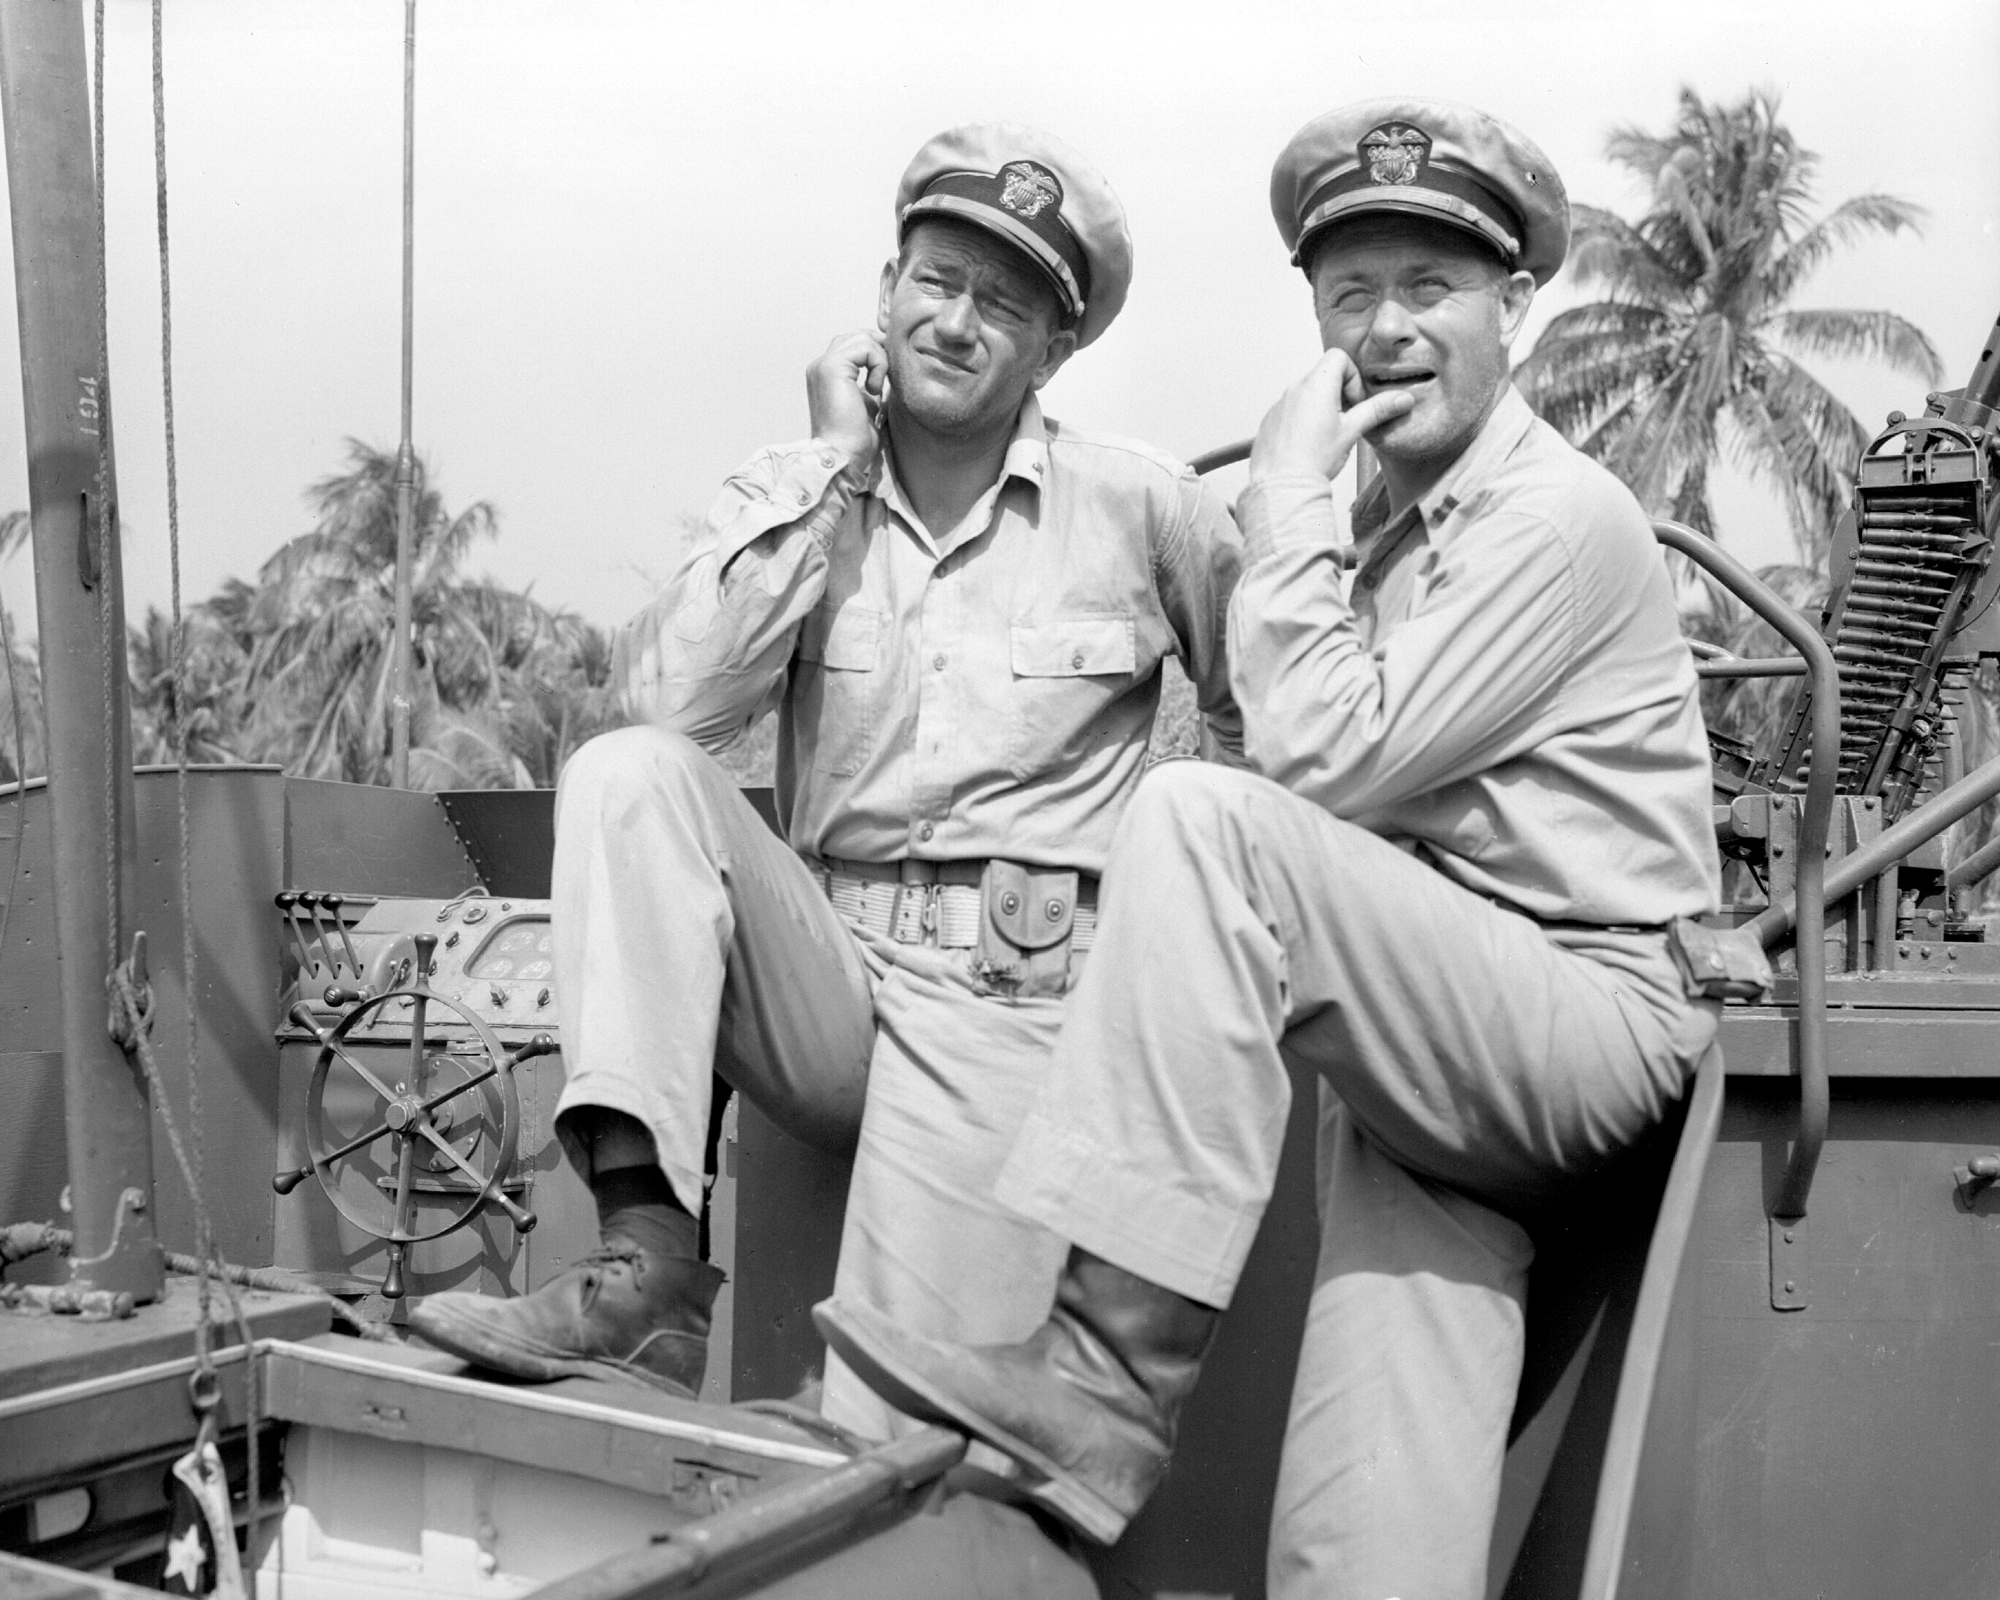 John Wayne as Lt. Rusty Ryan and Robert Montgomery as Lt. John Brickley, who had different career positions during World War II. They're wearing uniforms and squinting at the oncoming light while standing on a boat.